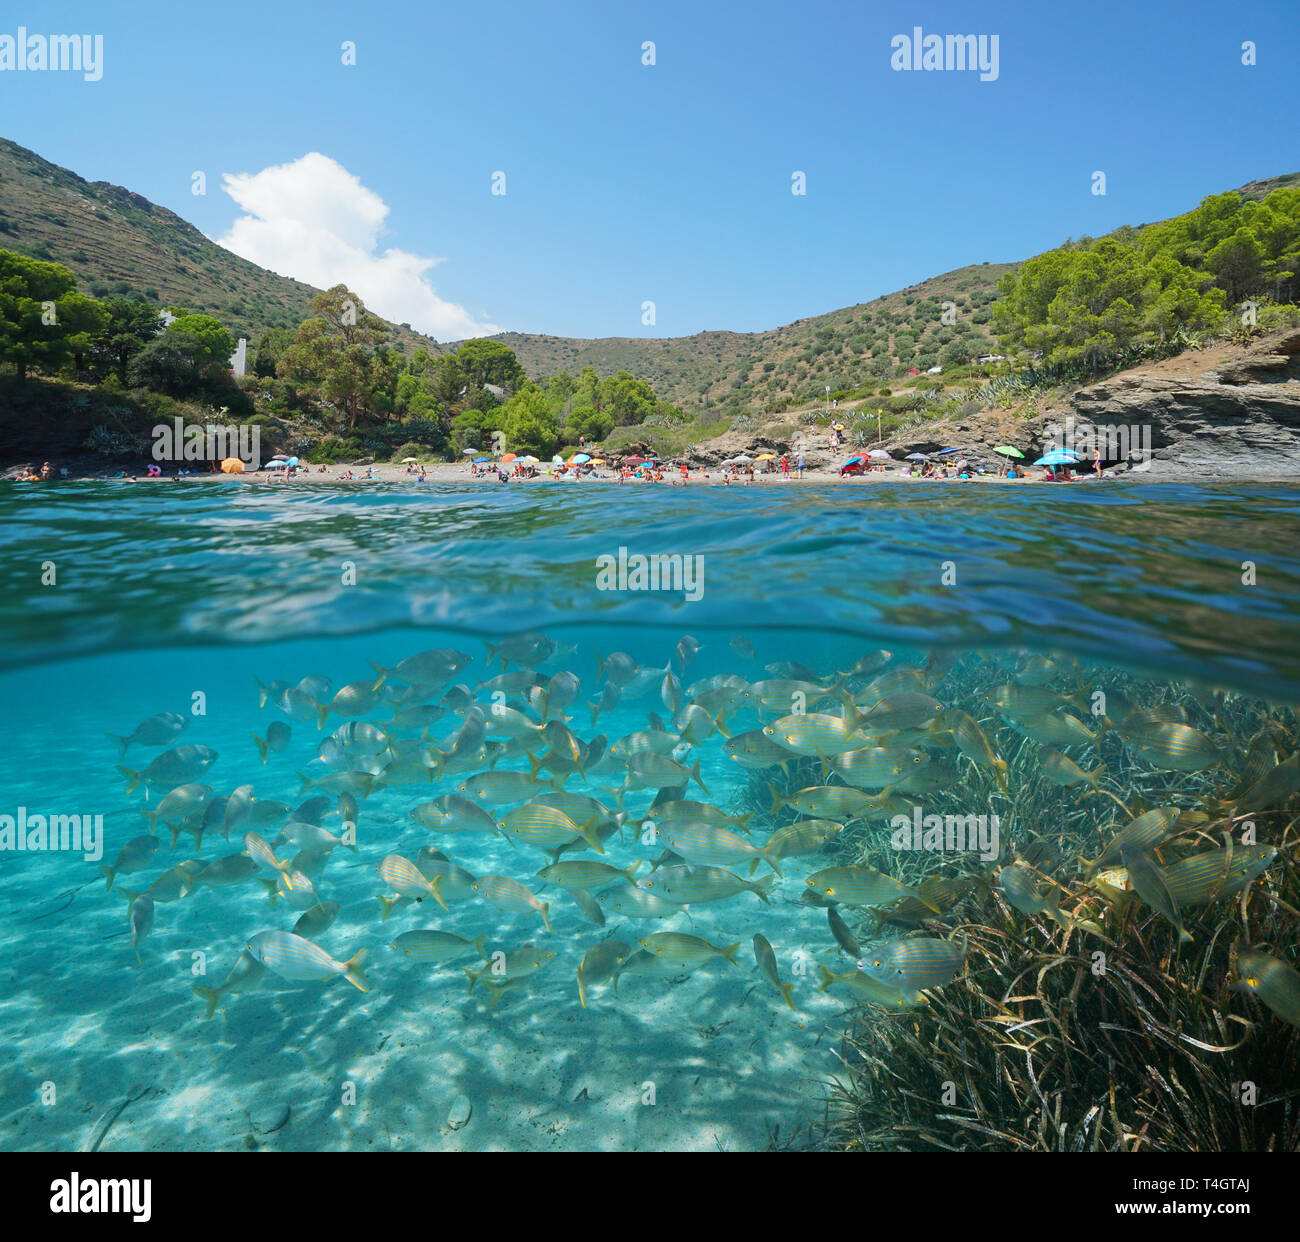 Spain summer vacations, Mediterranean beach with a shoal of fish underwater, Roses, Costa Brava, Catalonia, split view half over and under water Stock Photo